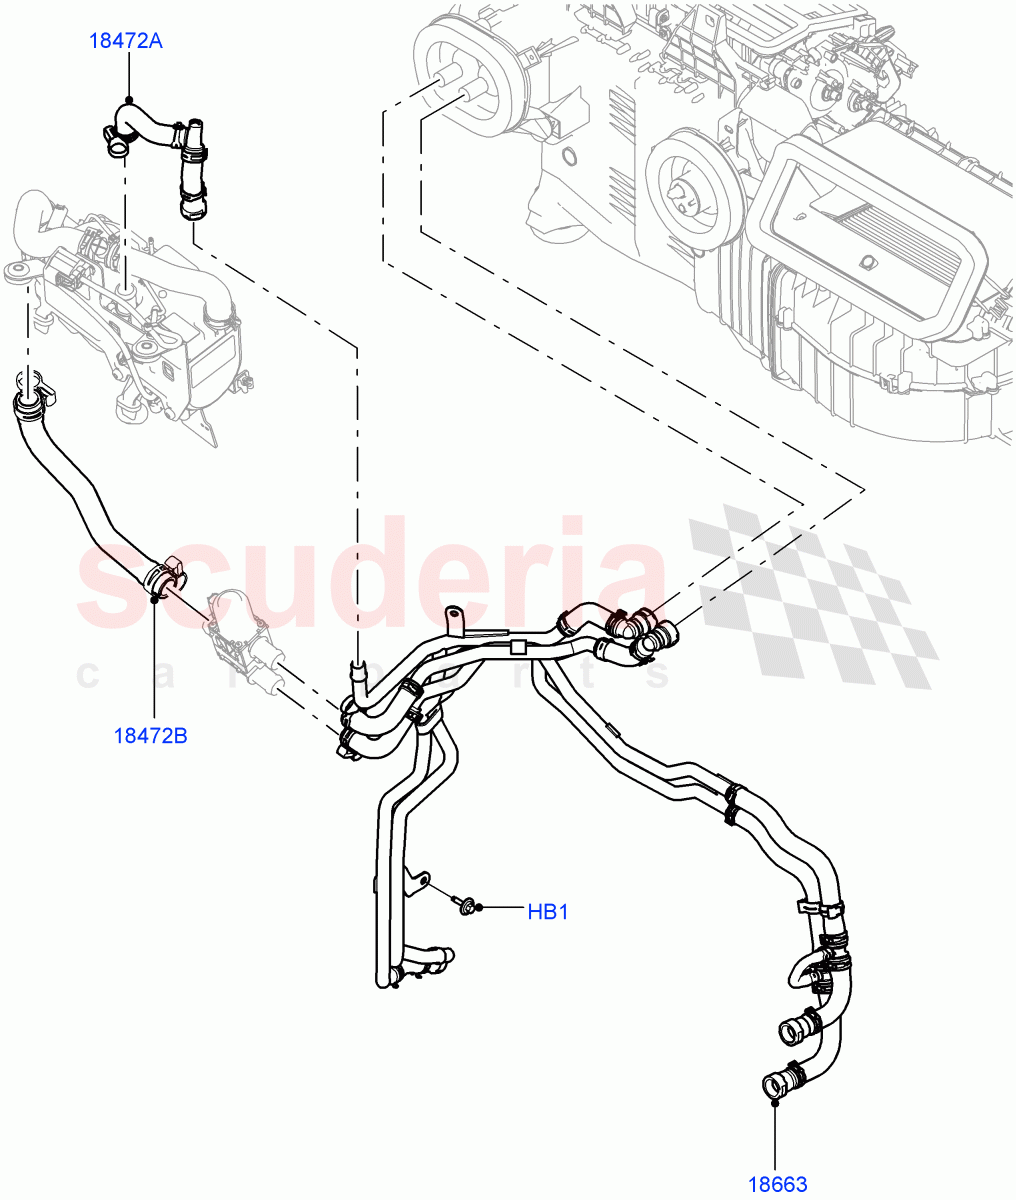 Heater Hoses(Solihull Plant Build)(2.0L I4 DSL MID DOHC AJ200,With Fuel Fired Heater,With Air Conditioning - Front/Rear,Park Heating With Remote Control,2.0L I4 DSL HIGH DOHC AJ200)((V)FROMHA000001,(V)TOHA999999) of Land Rover Land Rover Discovery 5 (2017+) [3.0 Diesel 24V DOHC TC]